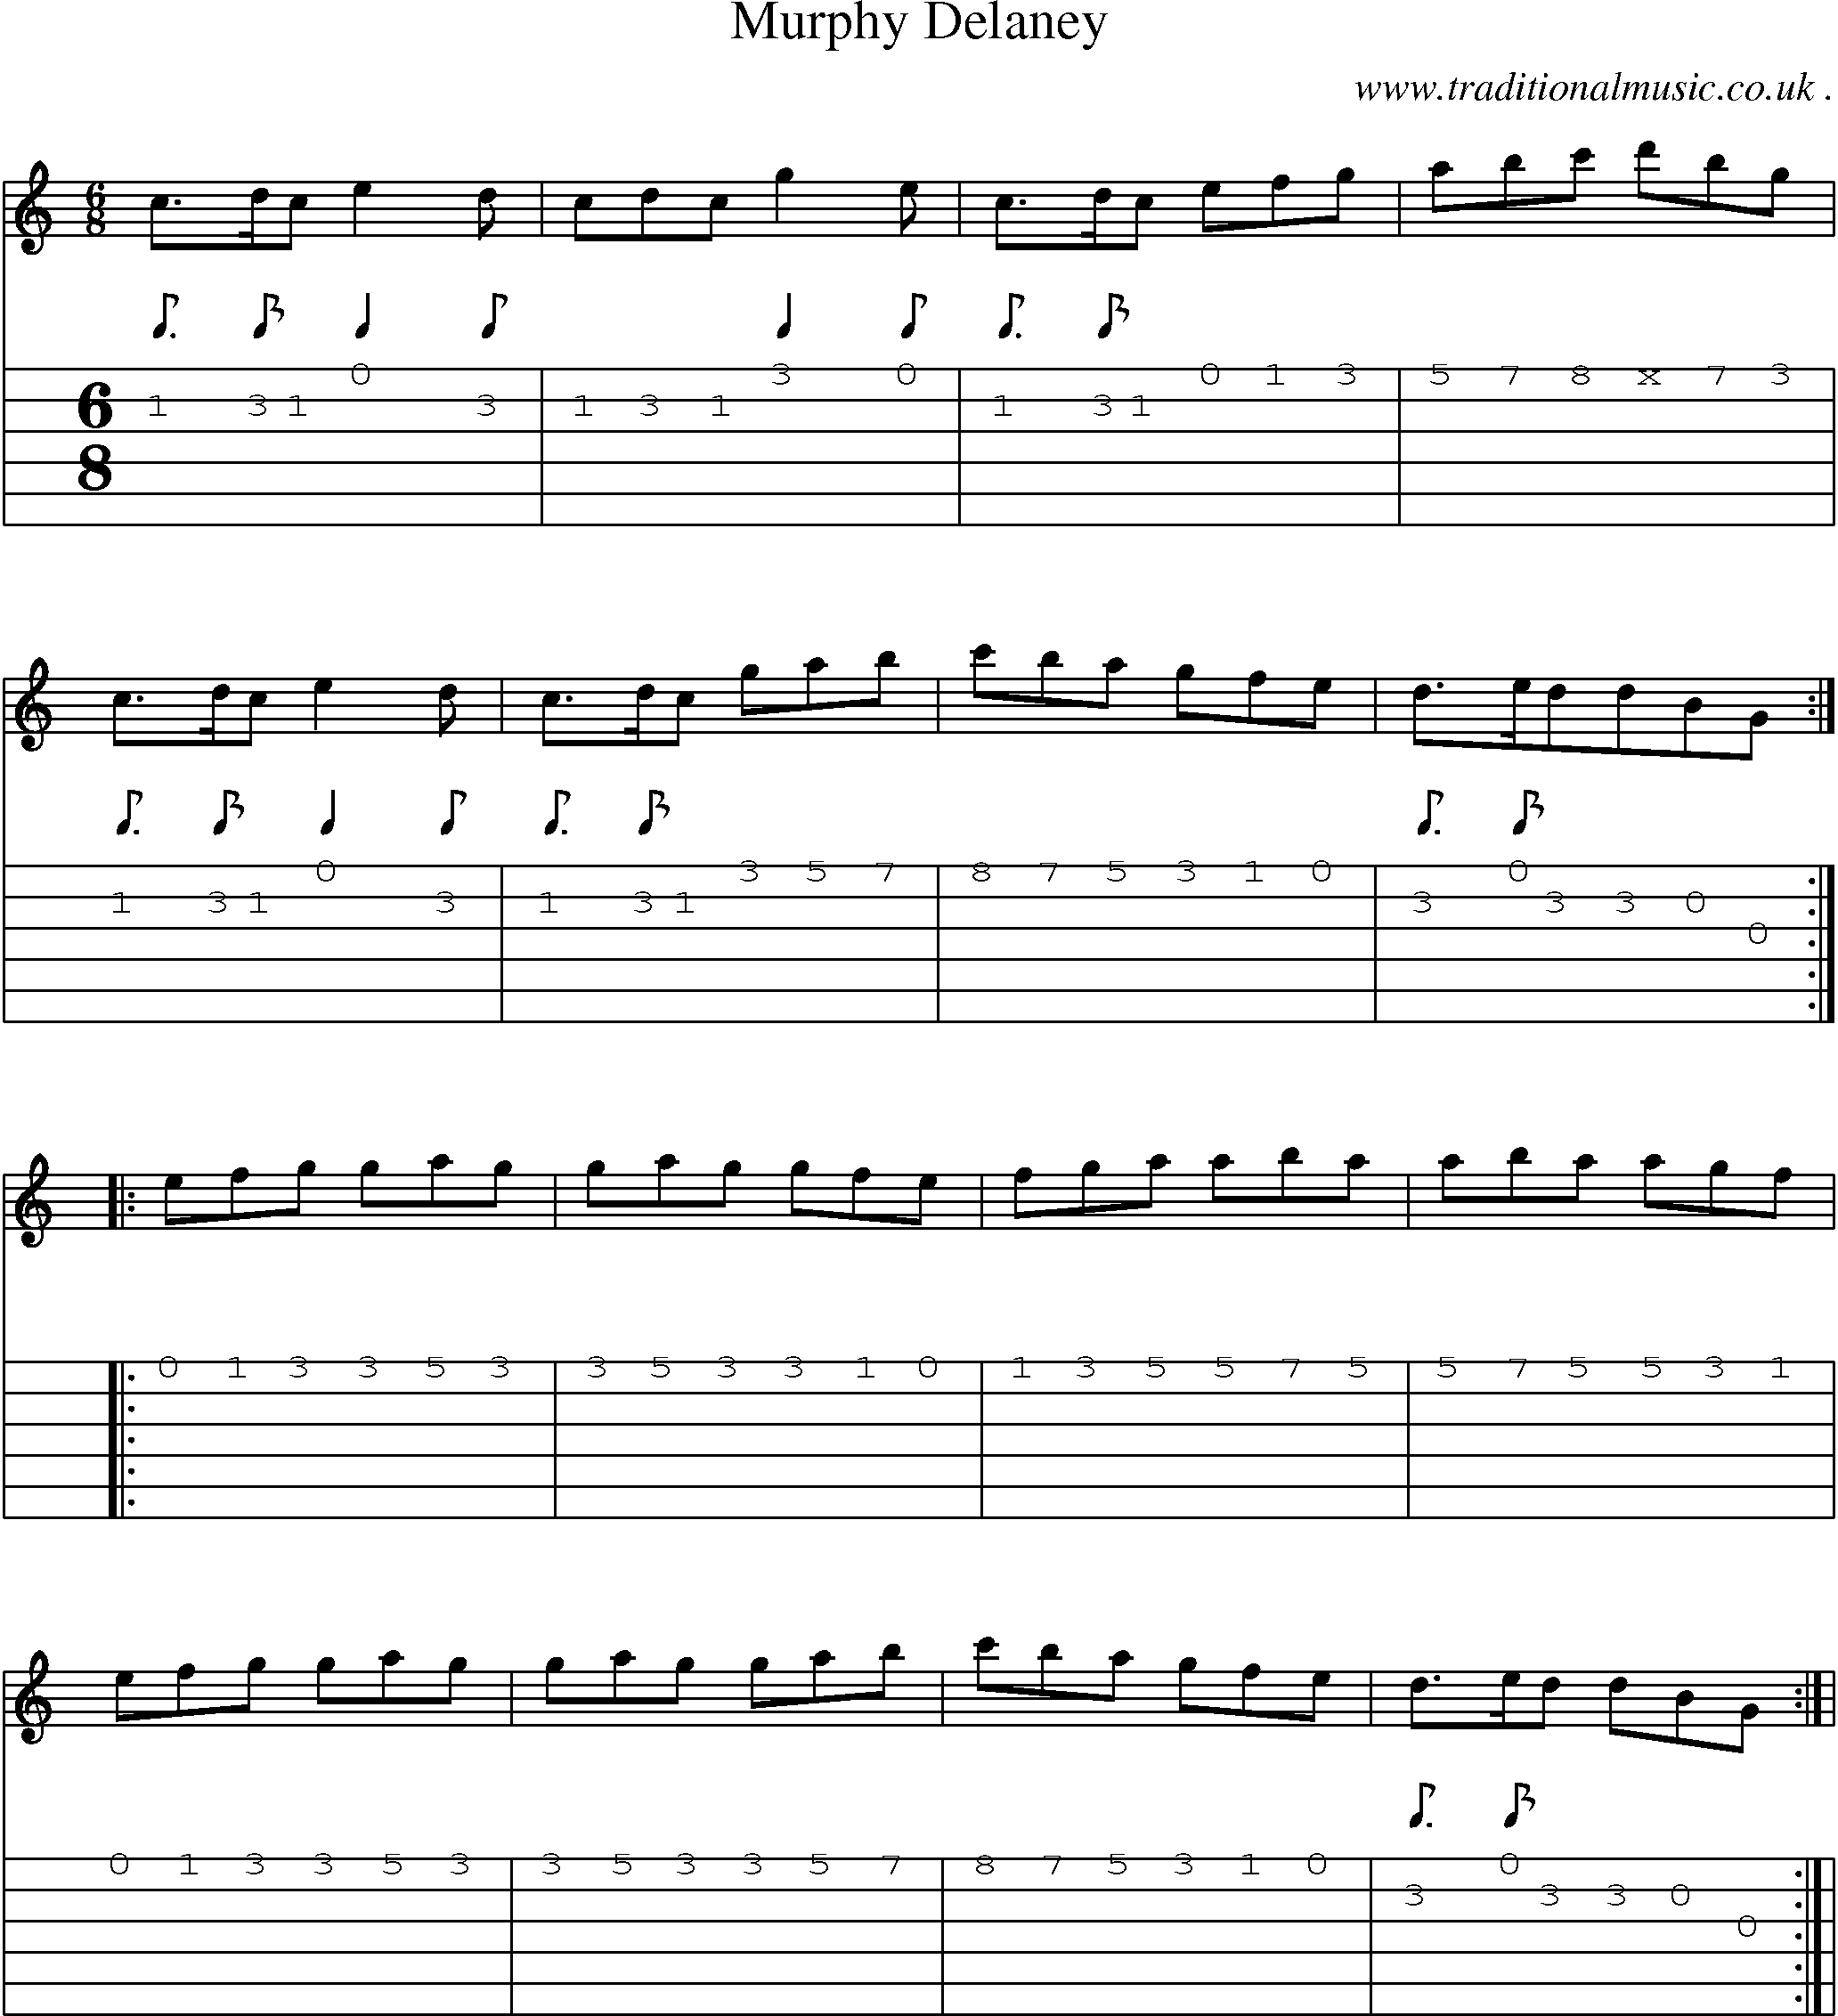 Sheet-Music and Guitar Tabs for Murphy Delaney